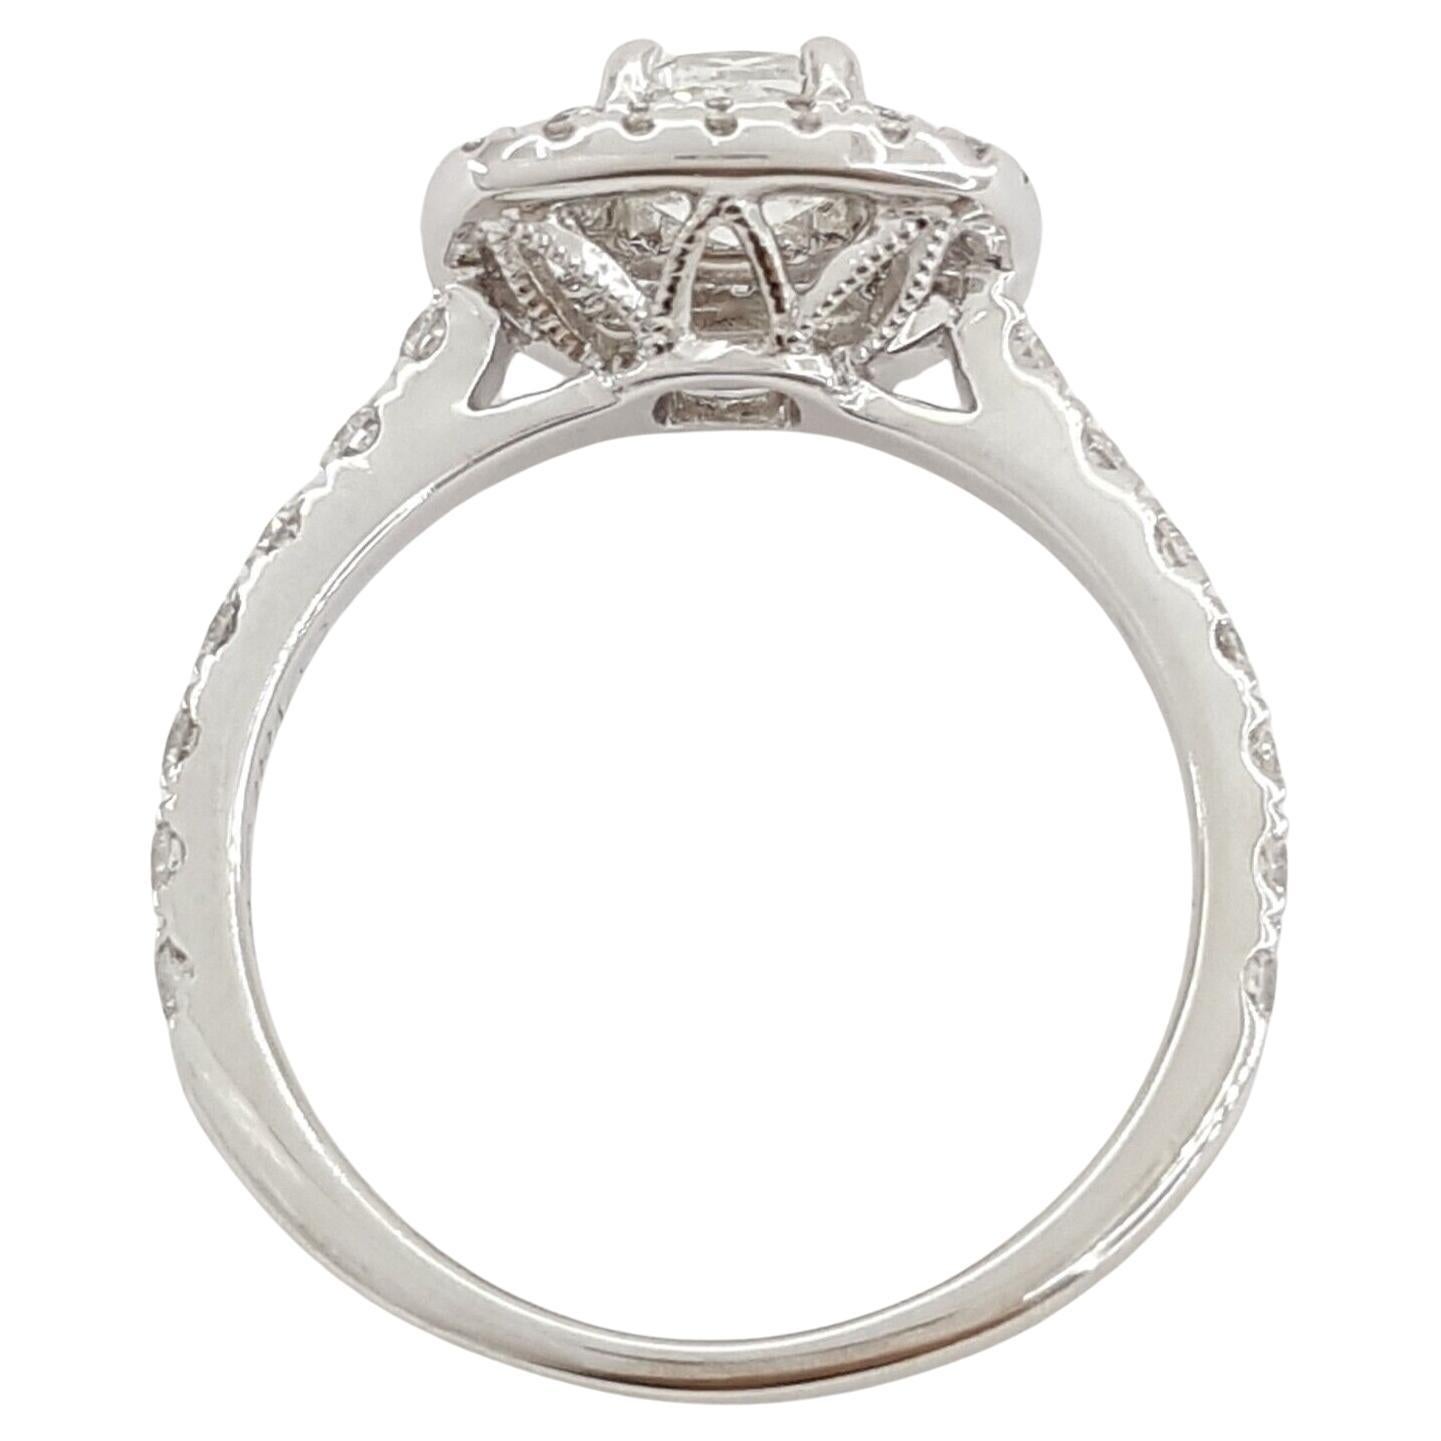  Neil Lane Bridal ® Collection, this 14k white gold engagement ring features a total weight of 1.20 carats, adorned with a captivating Cushion Brilliant Cut diamond in a double halo design.

Weighing 3.2 grams and sized at 5.25, the ring boasts a